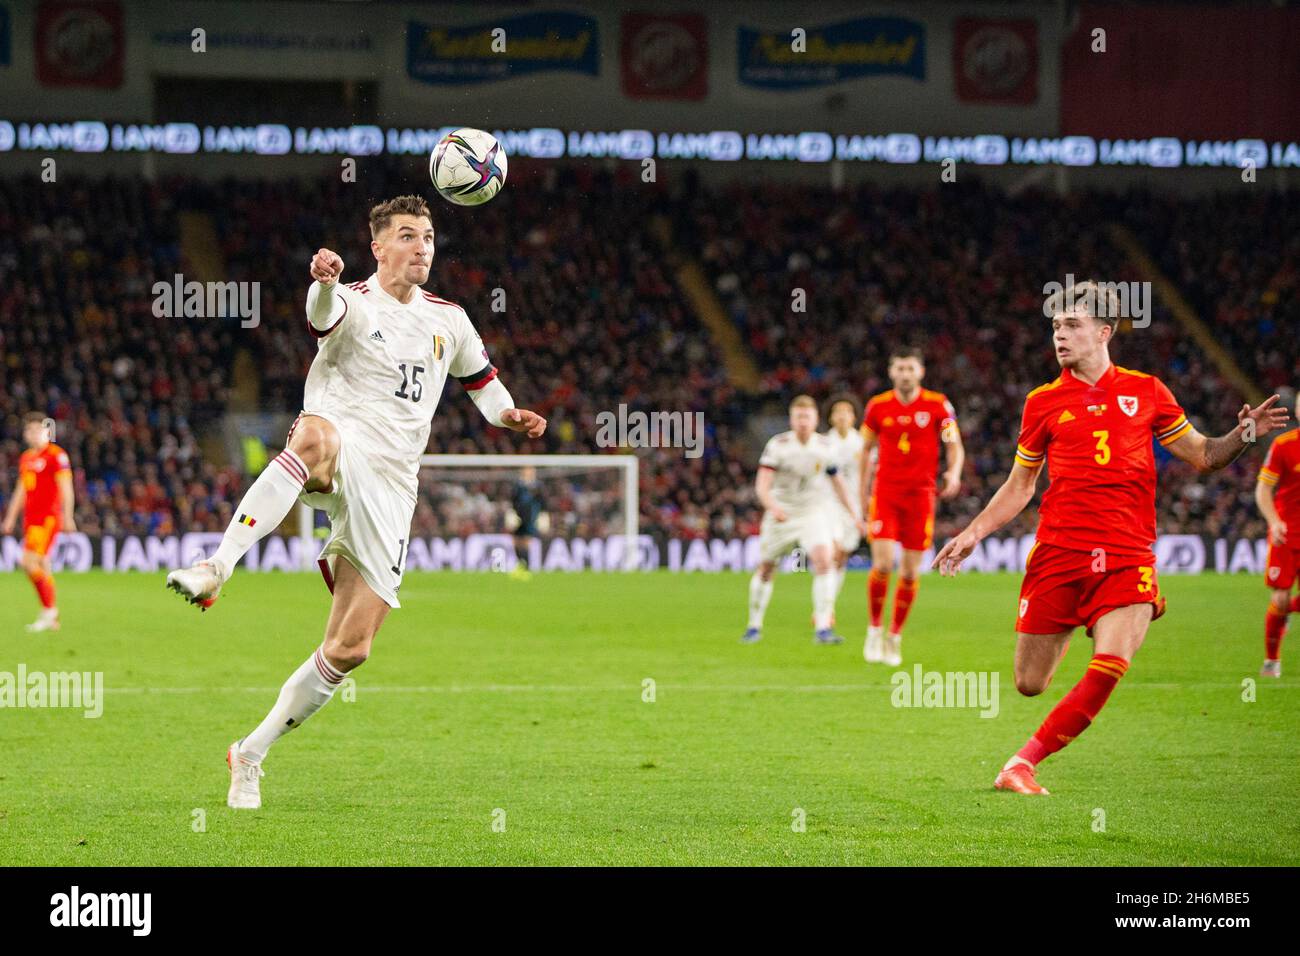 Cardiff, Wales, UK. 16th Nov, 2021. Thomas Meunier of Belgium and Neco Williams of Wales during the World Cup 2022 group qualification match between Wales and Belgium at the Cardiff City Stadium. Credit: Mark Hawkins/Alamy Live News Stock Photo